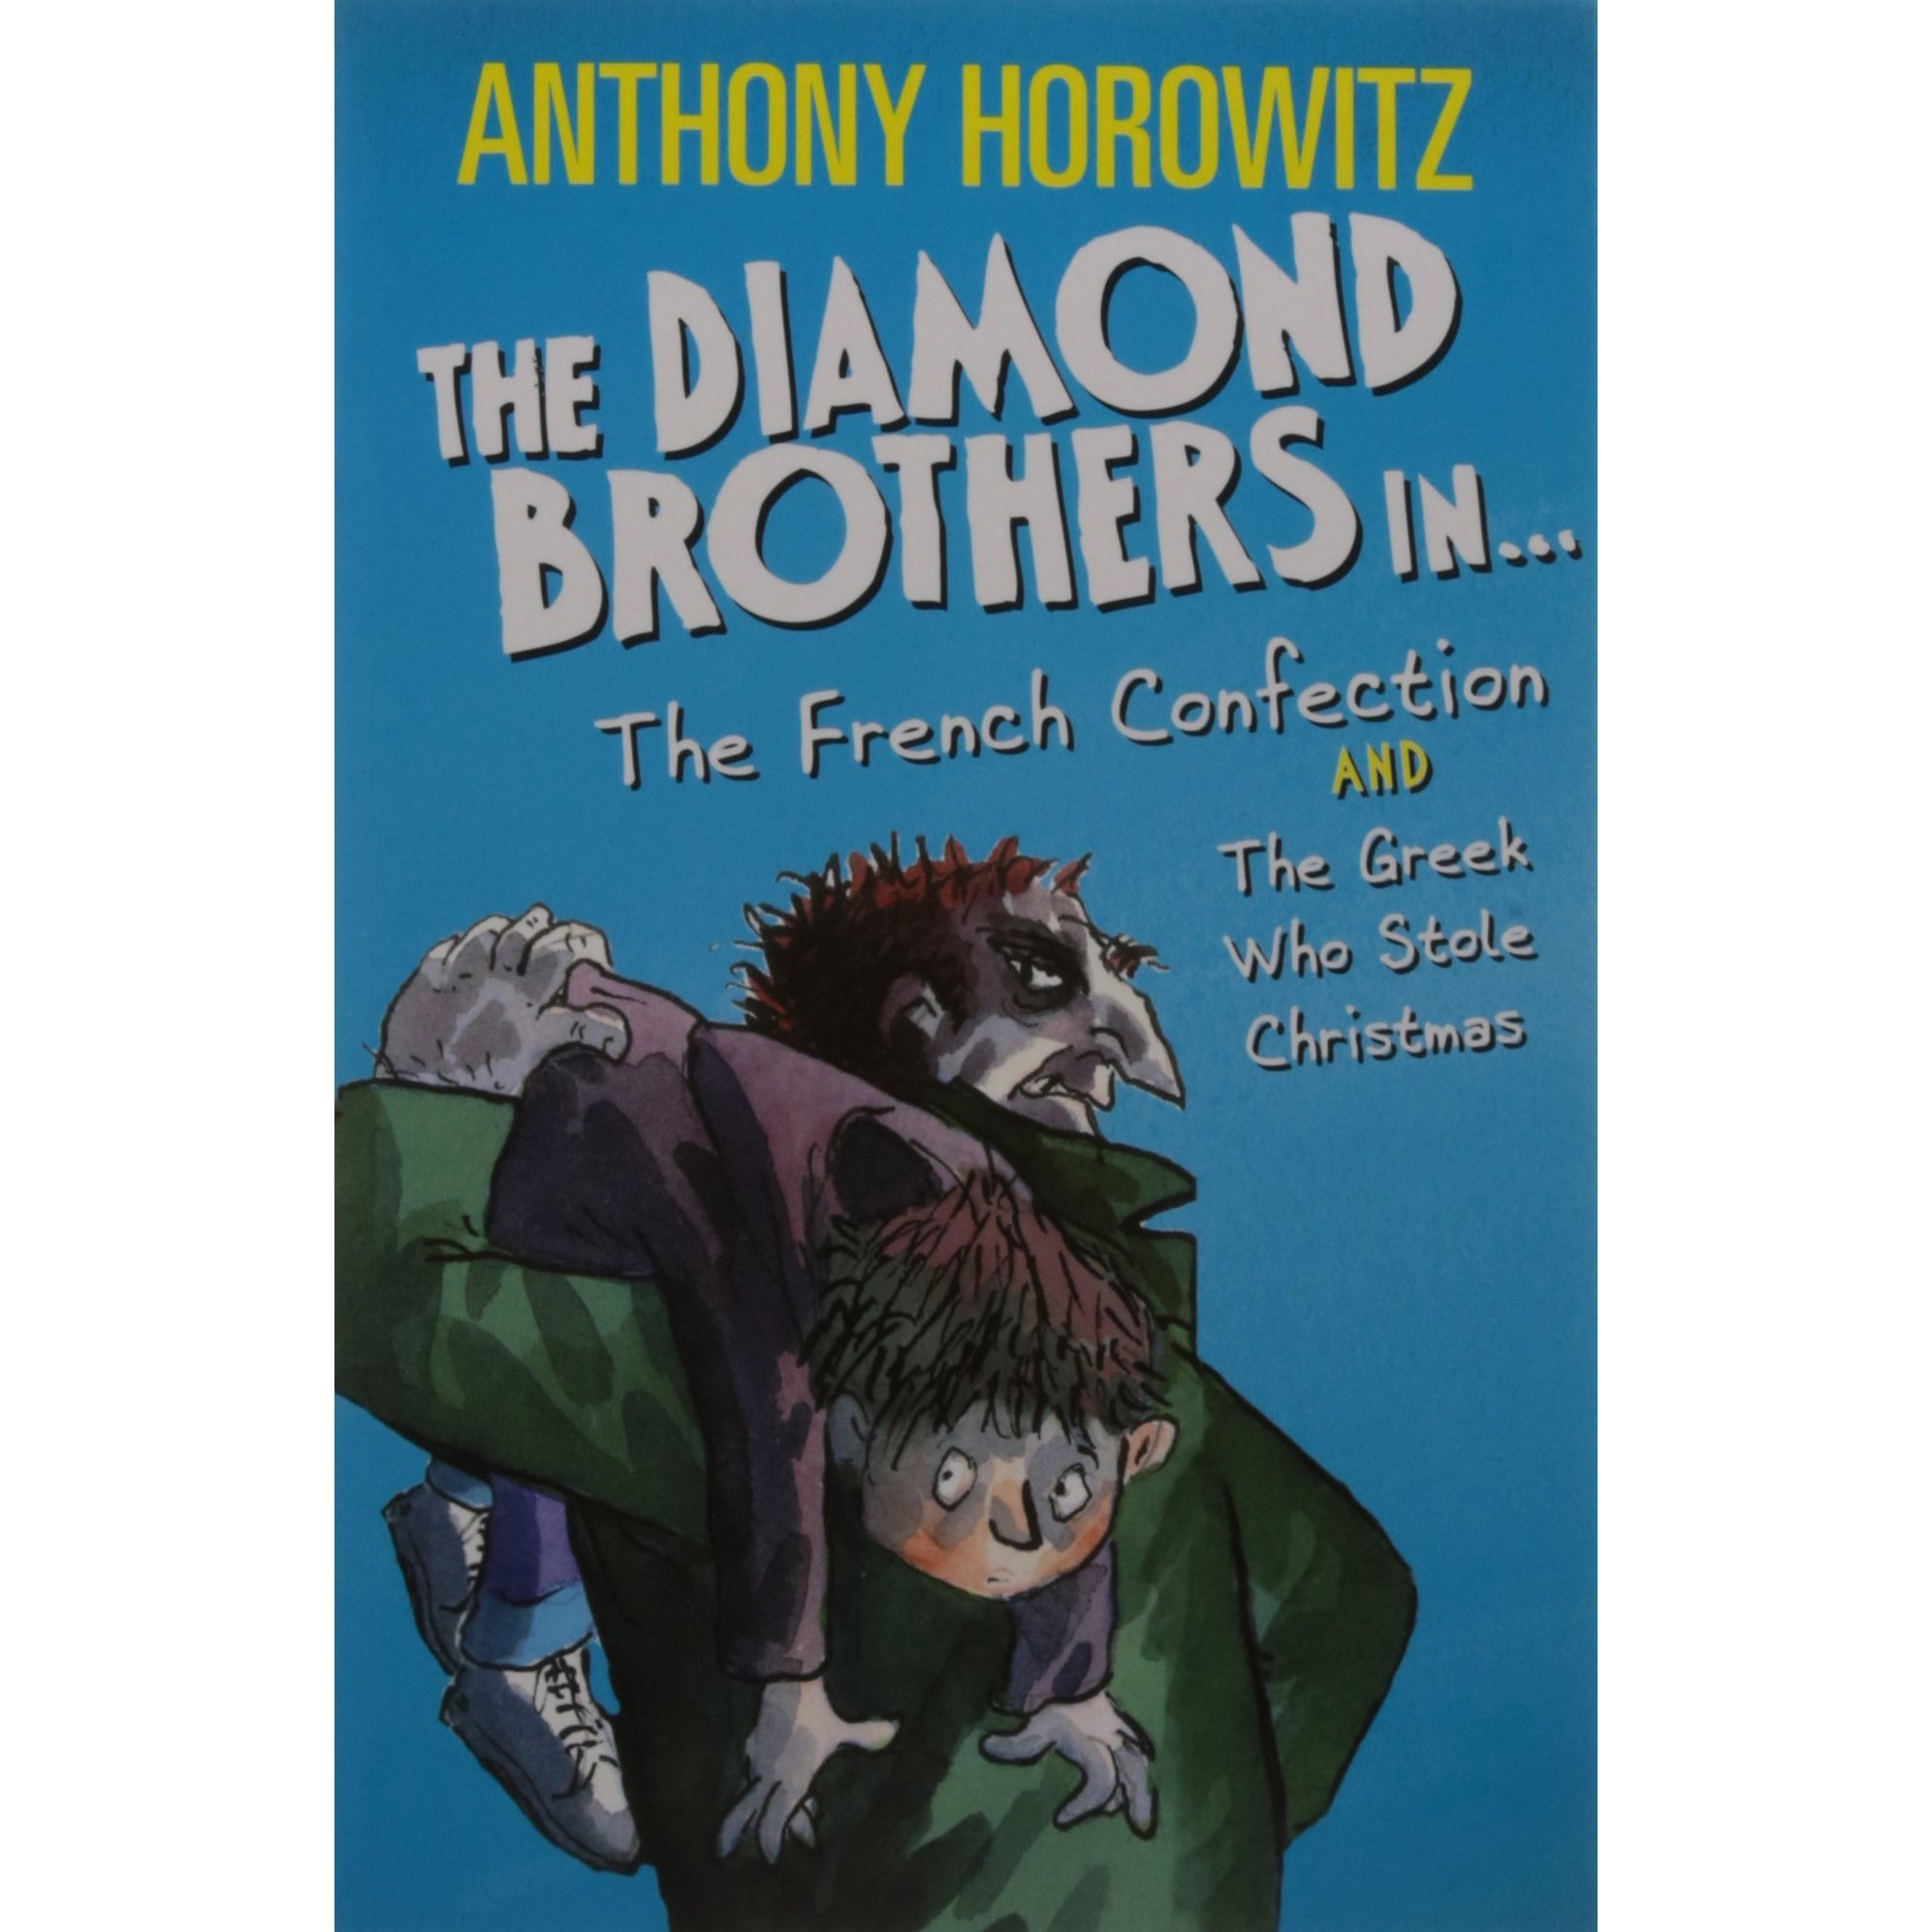 Sách tiếng Anh - The Wickedly Funny Anthony Horowitz: The Diamond Brothers In The French Confection